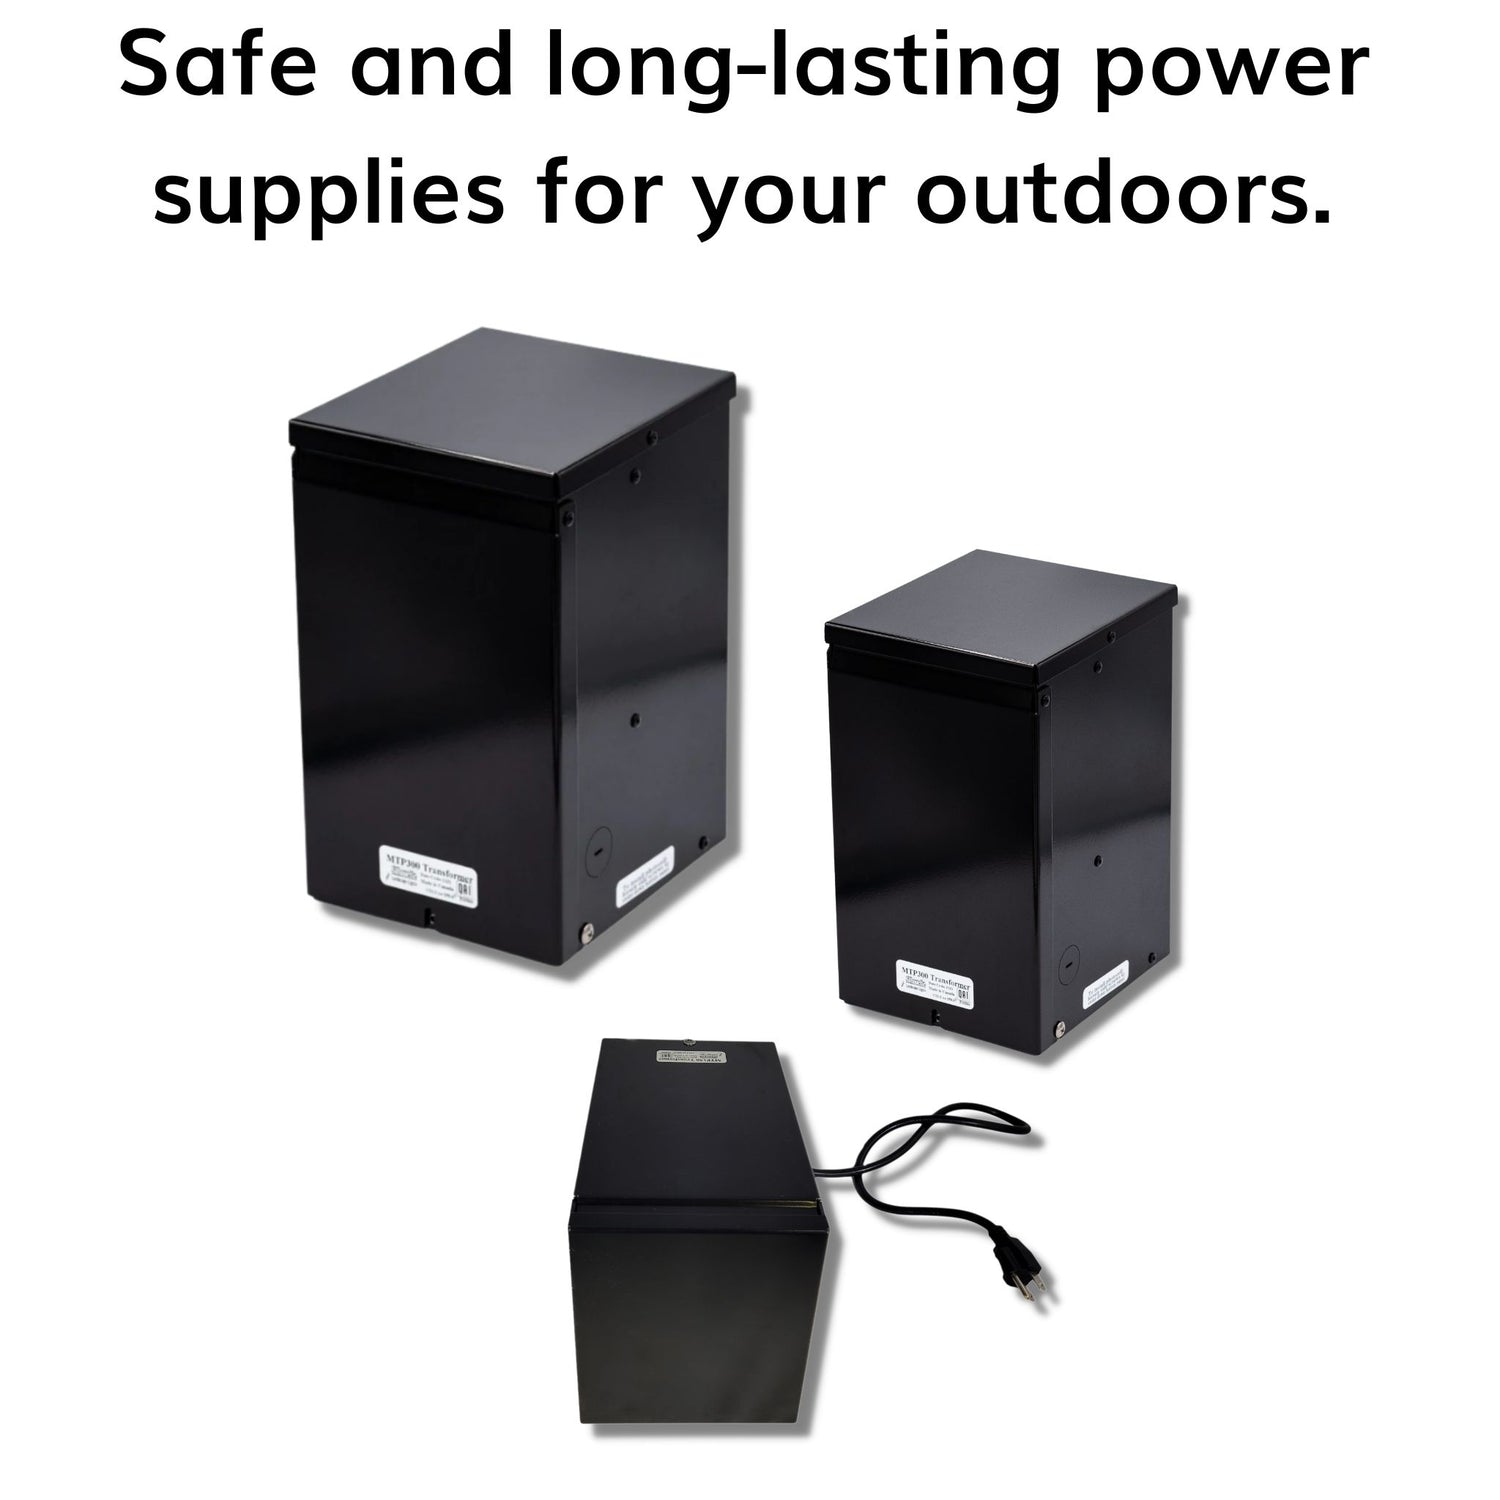 Safe and long-lasting power supplies for your outdoor LED Landscaping Lights.